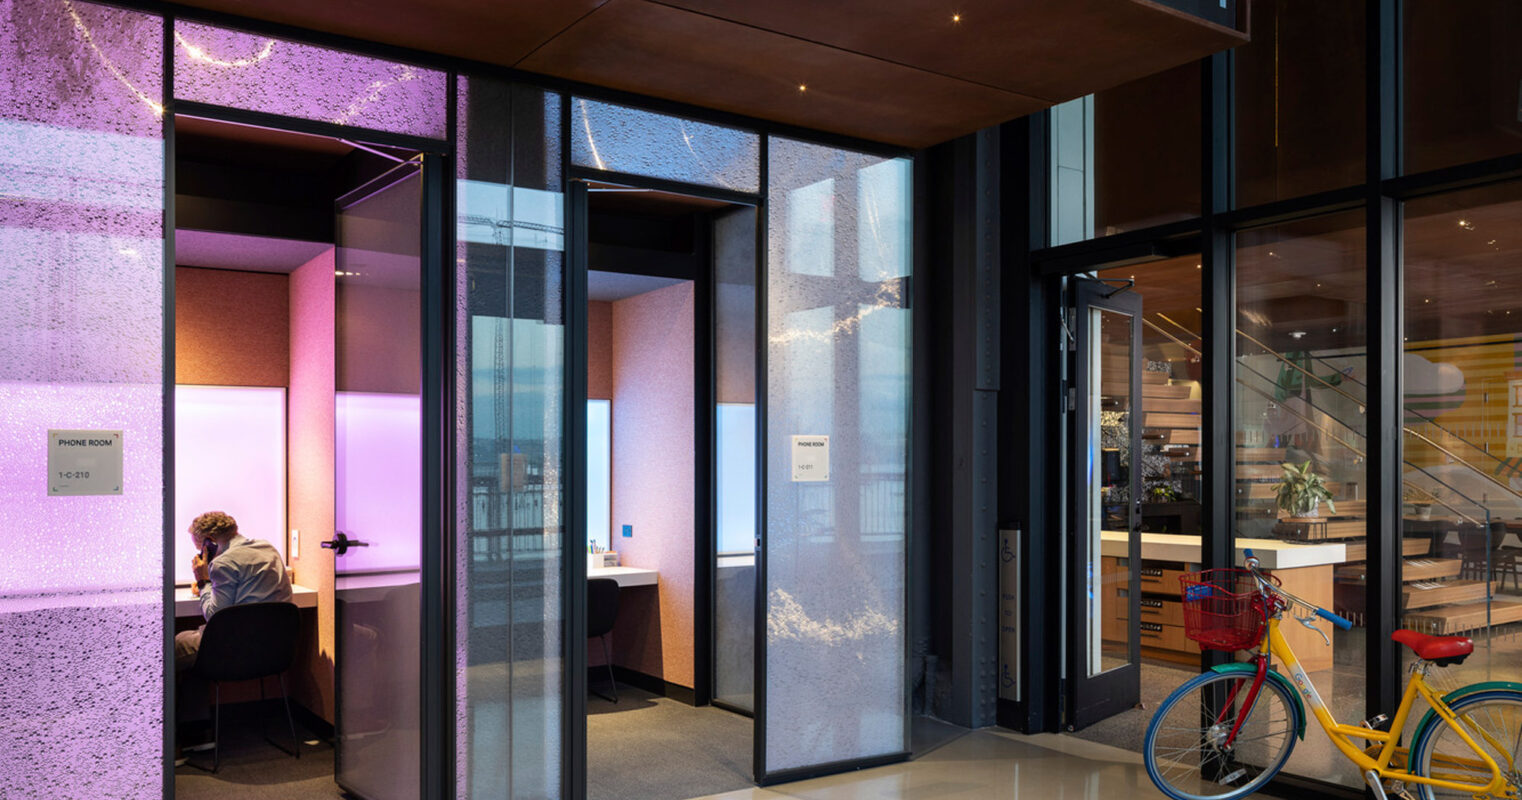 Modern office lobby featuring reflective marble floors, glass partition walls with embedded lighting, and a focal purple illuminated panel. The sleek design includes natural wood tones and a strategically placed yellow bicycle adding a pop of color.